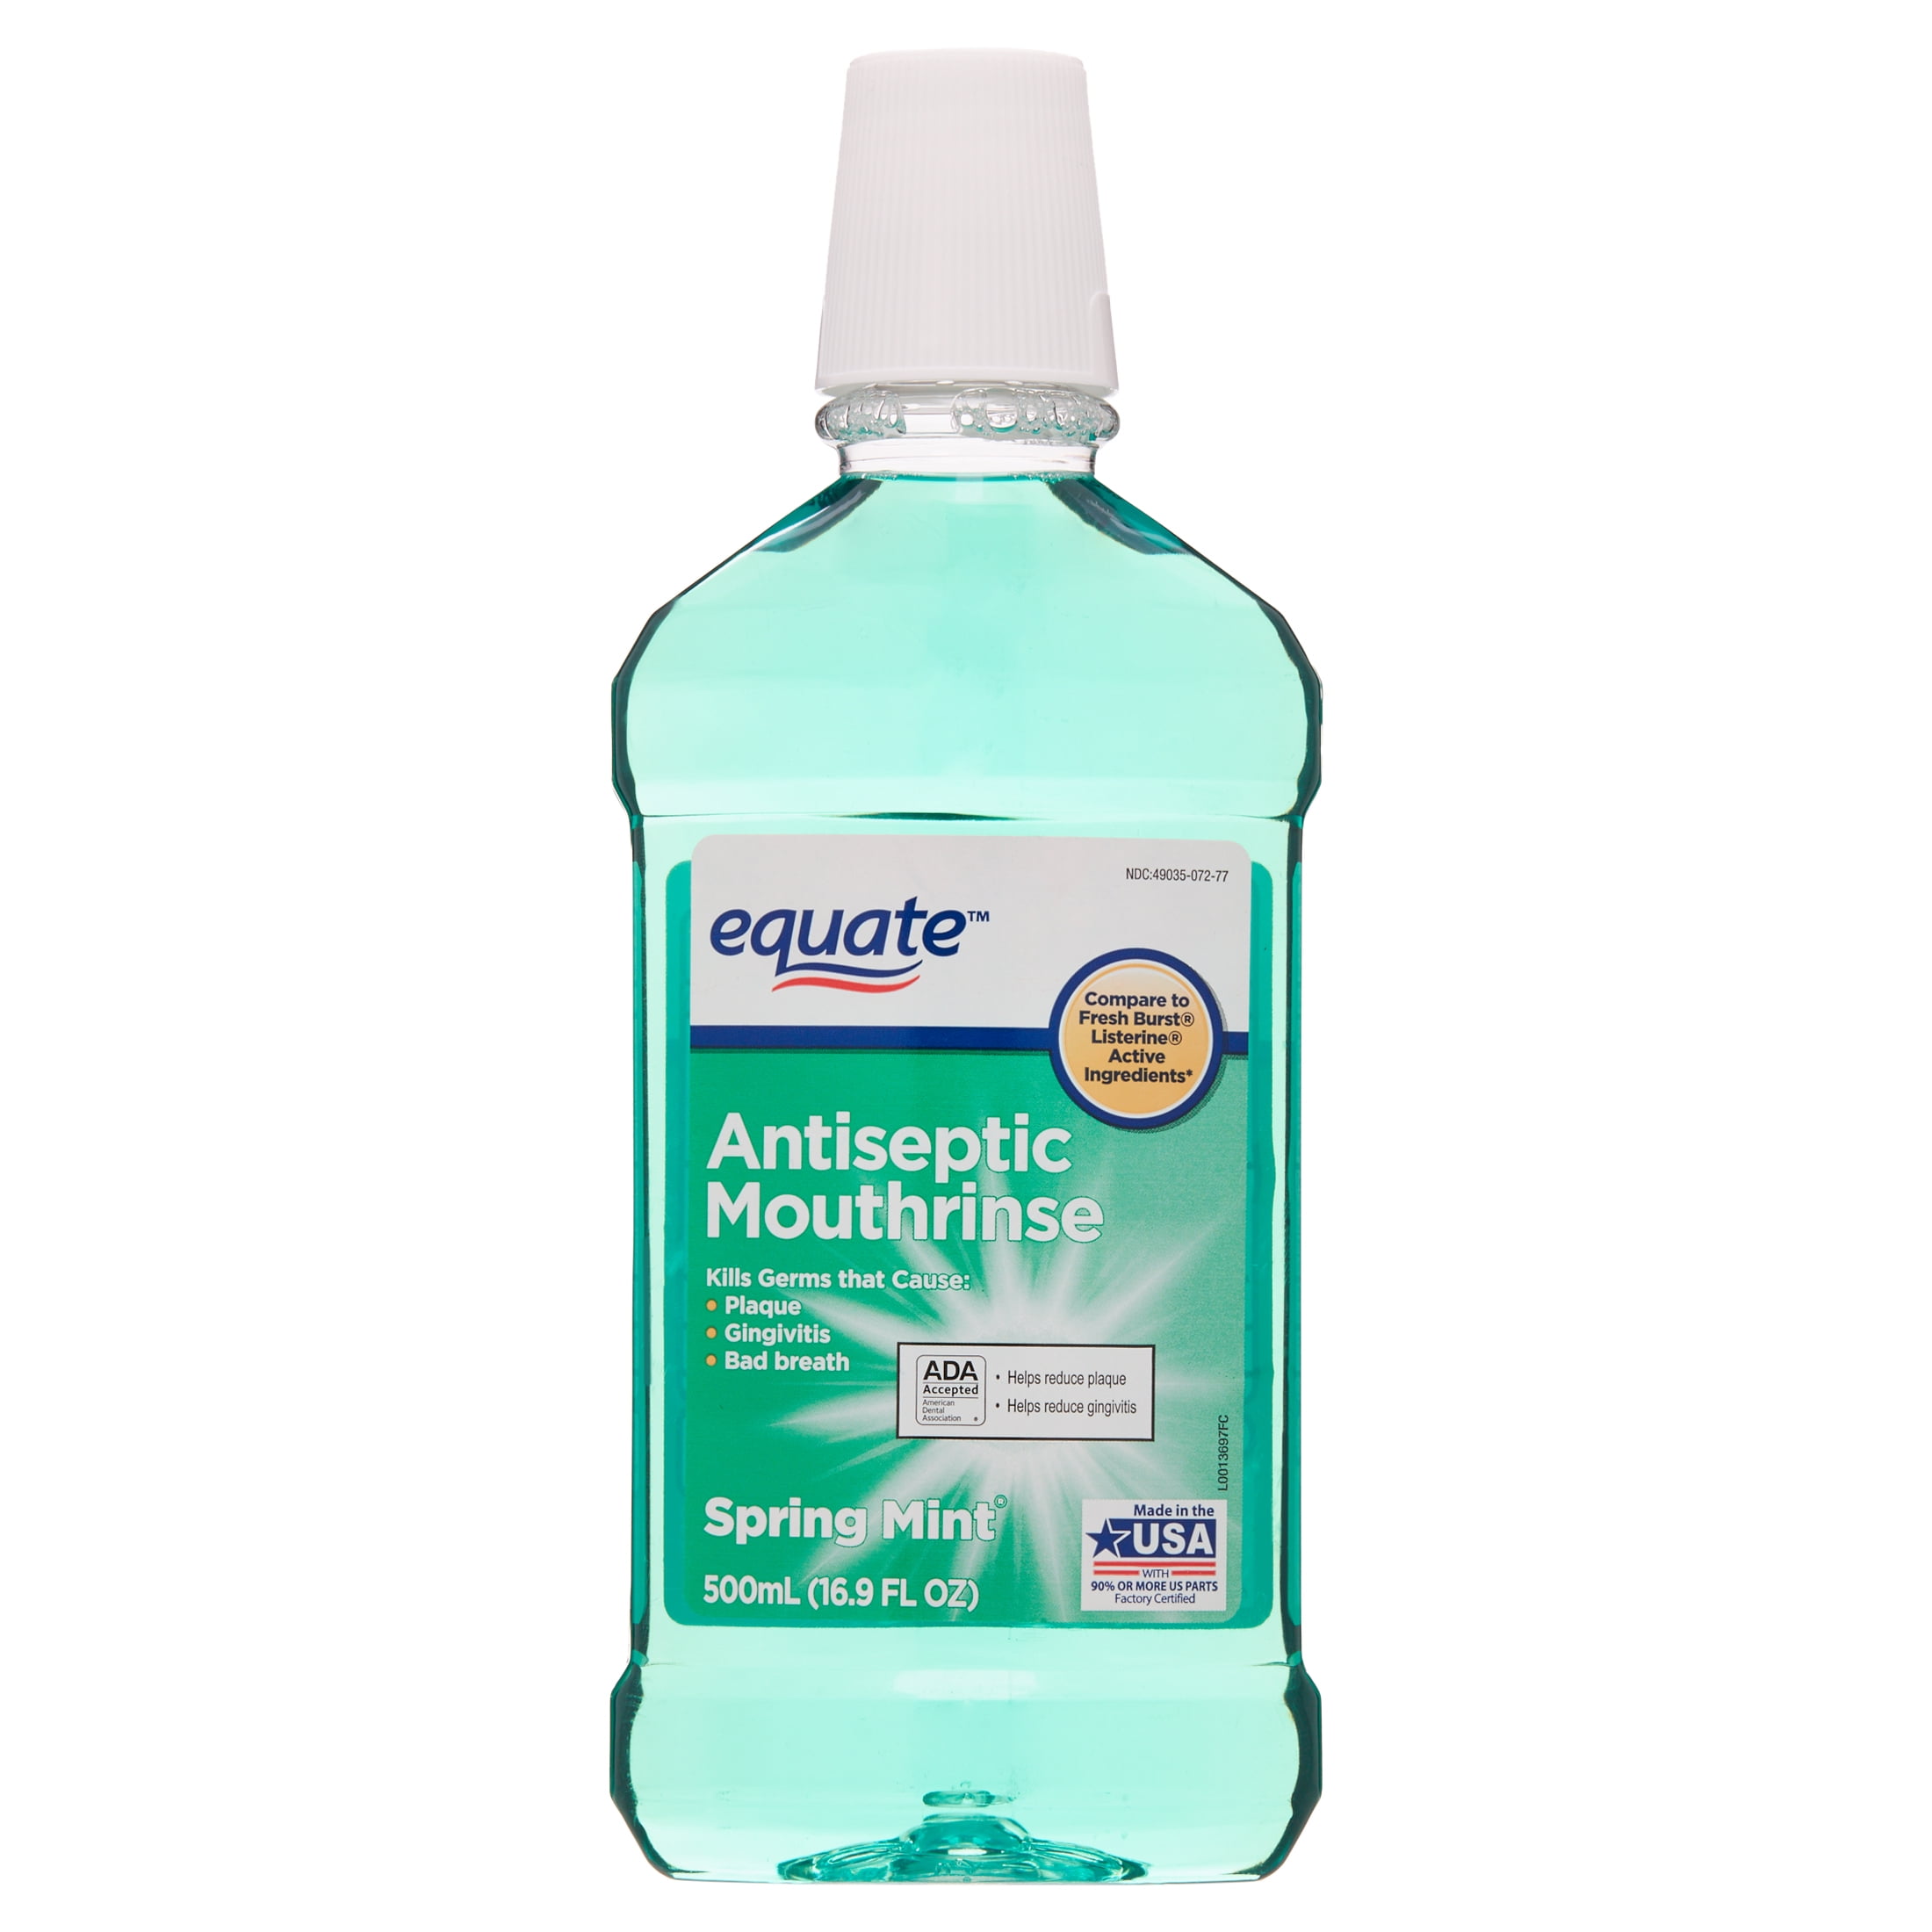 Equate Antiseptic Mouthrinse, Spring Mint, 16.9 fl oz